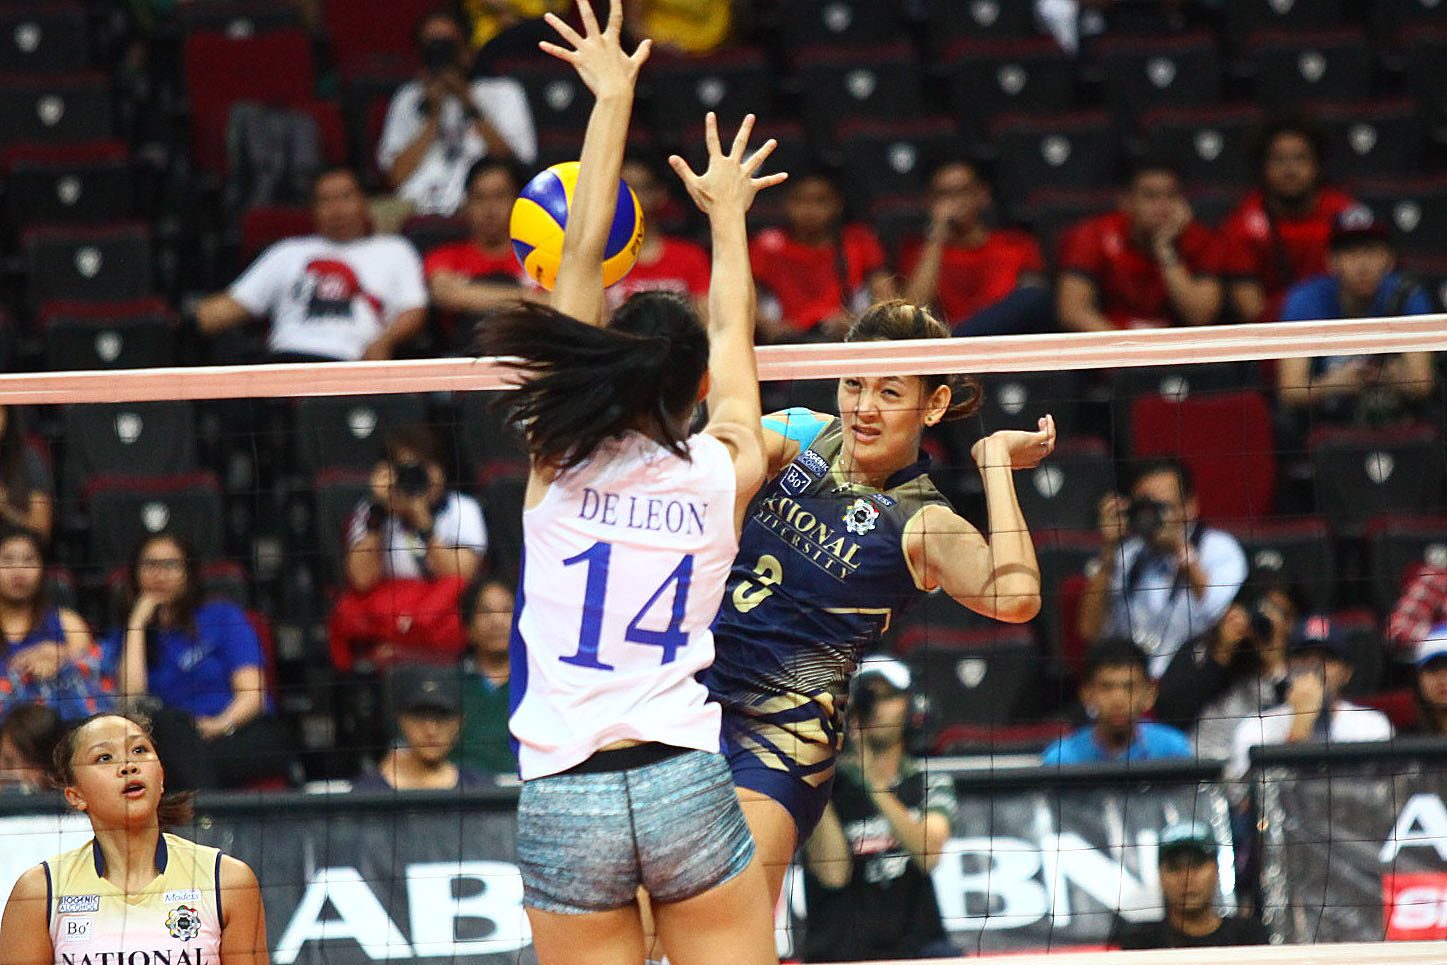 NU completes sweep of Ateneo to win V-League title